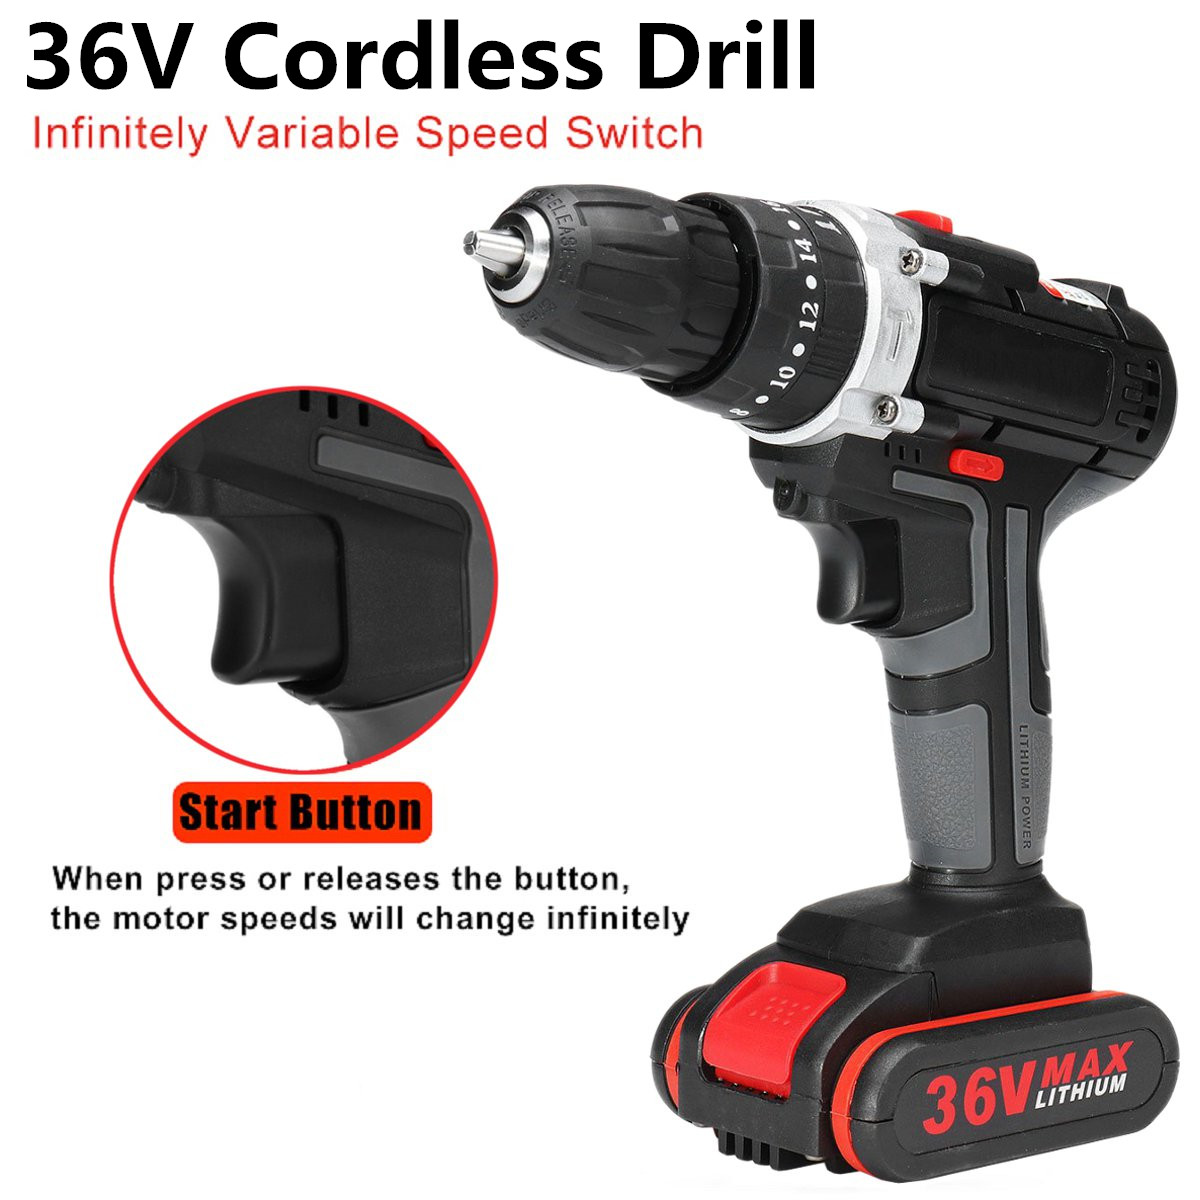 36V-Cordless-Lithium-Electric-Drill-Impact-Power-Drills-28Nm-3000mAh-183-Torque-Stage-Drill-Tools-1404353-4